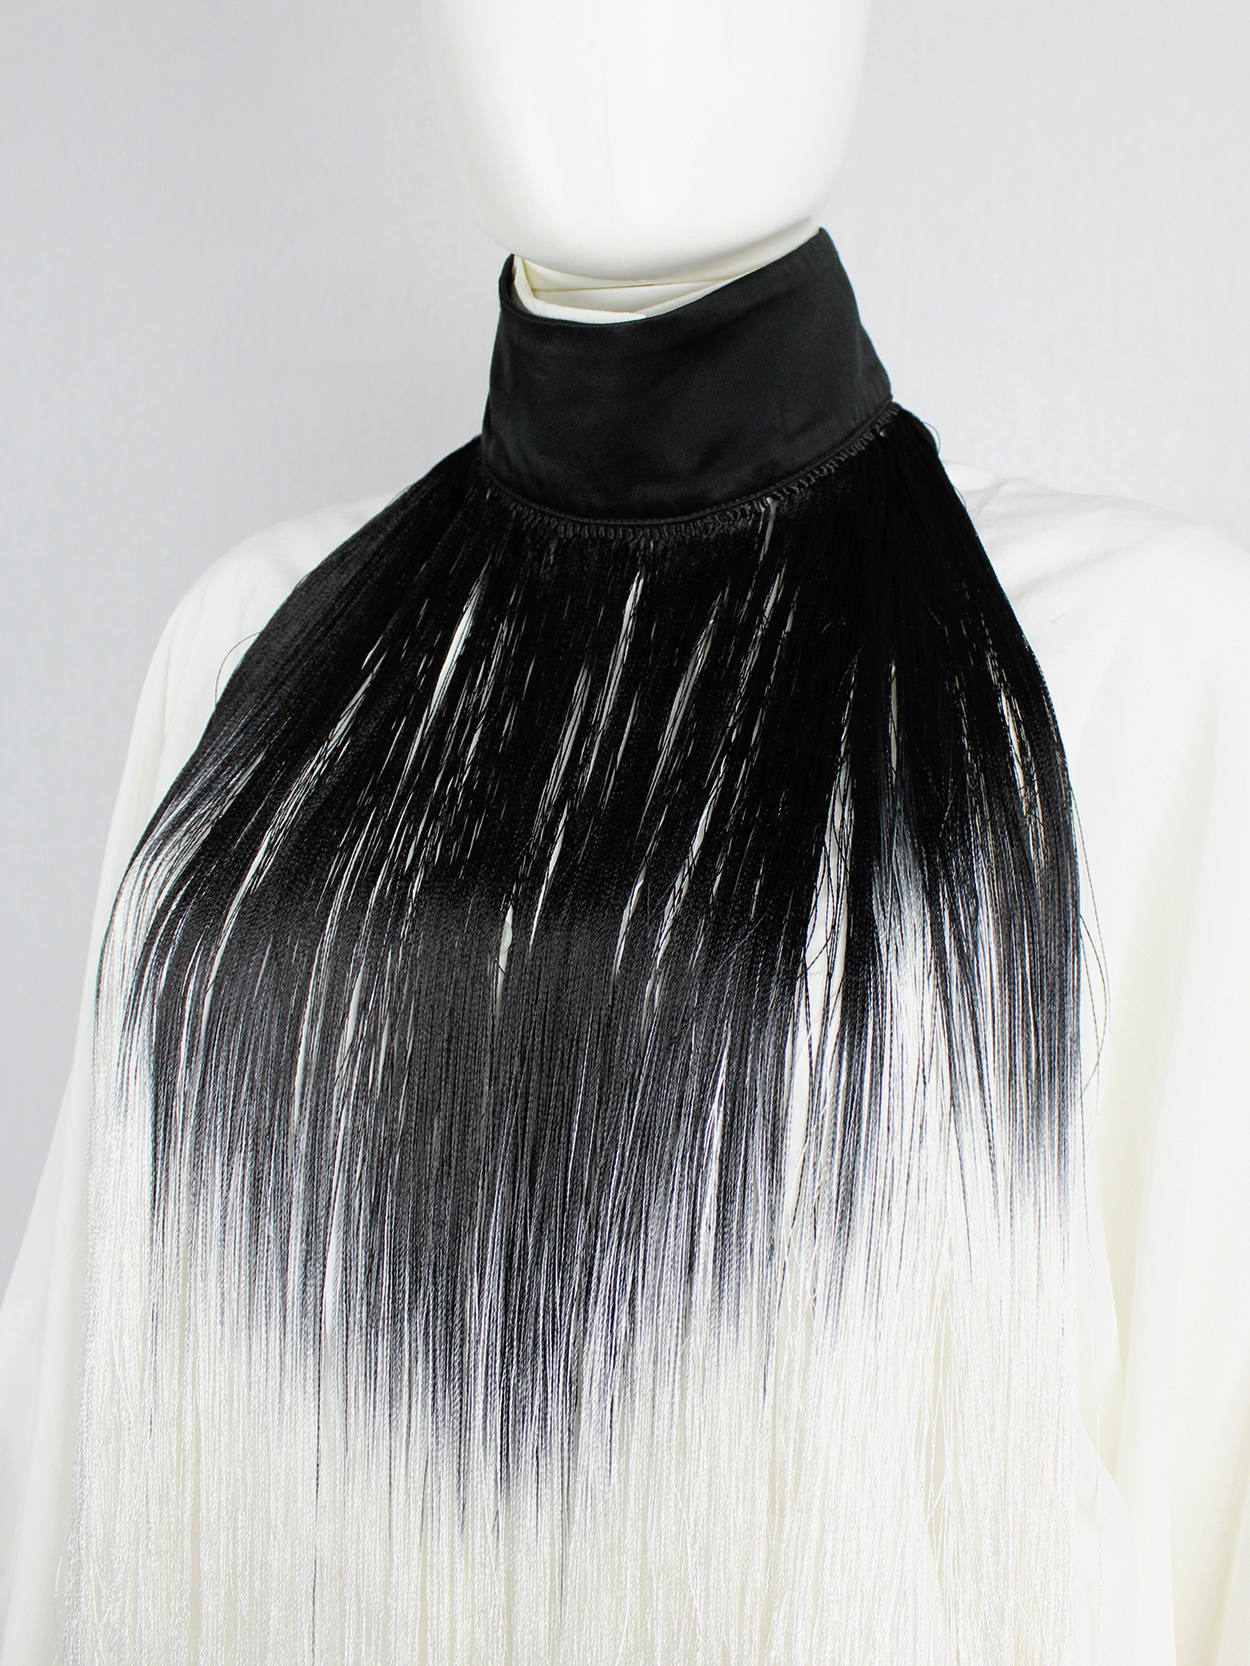 vaniitas Ann Demeulemeester fringe bib necklace with black and white ombre runway fall 2013 (5)